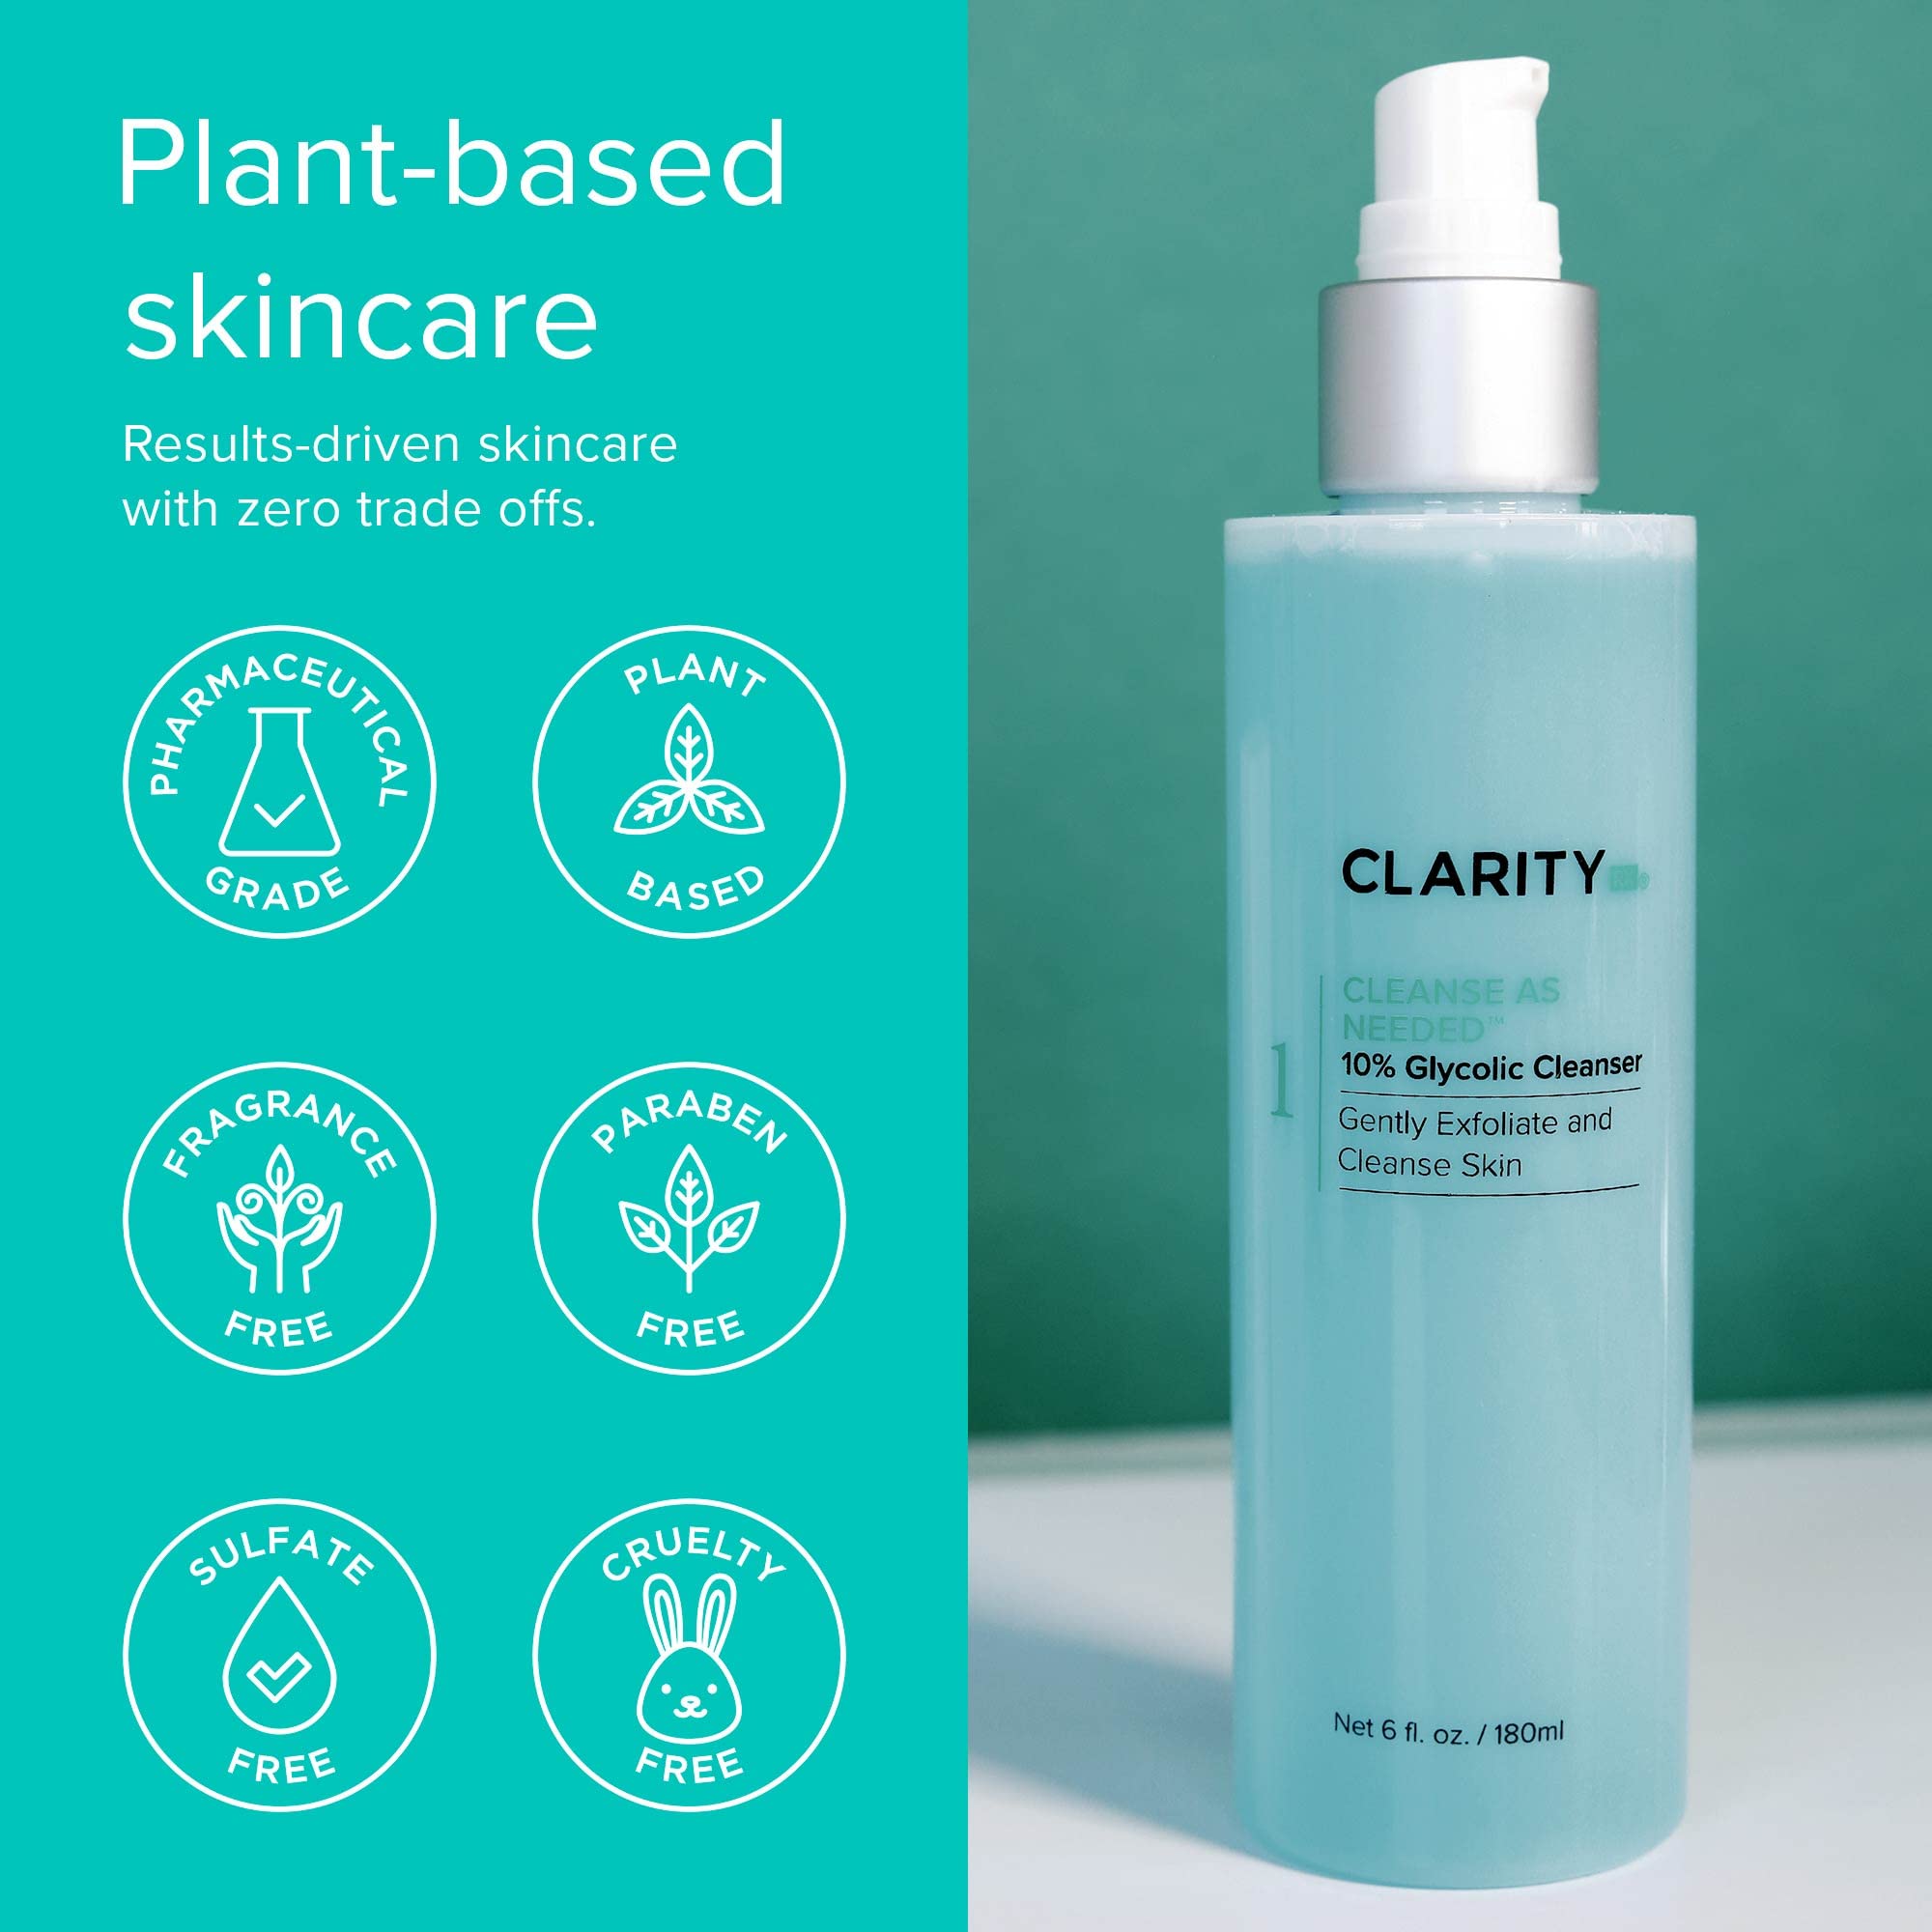 ClarityRx Cleanse As Needed 10% Glycolic Acid Facial Cleanser; Plant Based Exfoliating Face Wash; Paraben Free; Natural Skin Care